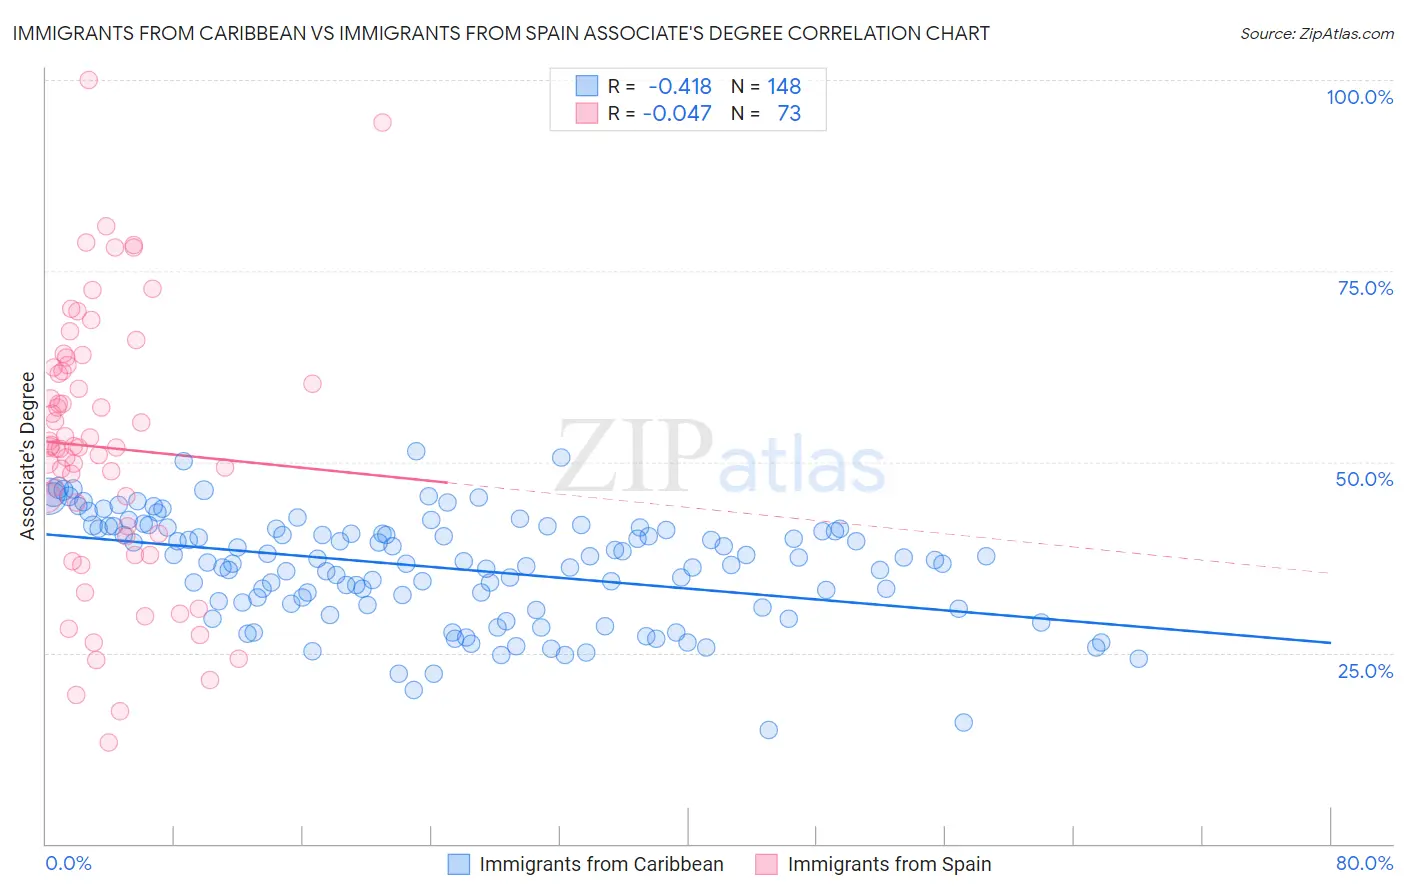 Immigrants from Caribbean vs Immigrants from Spain Associate's Degree